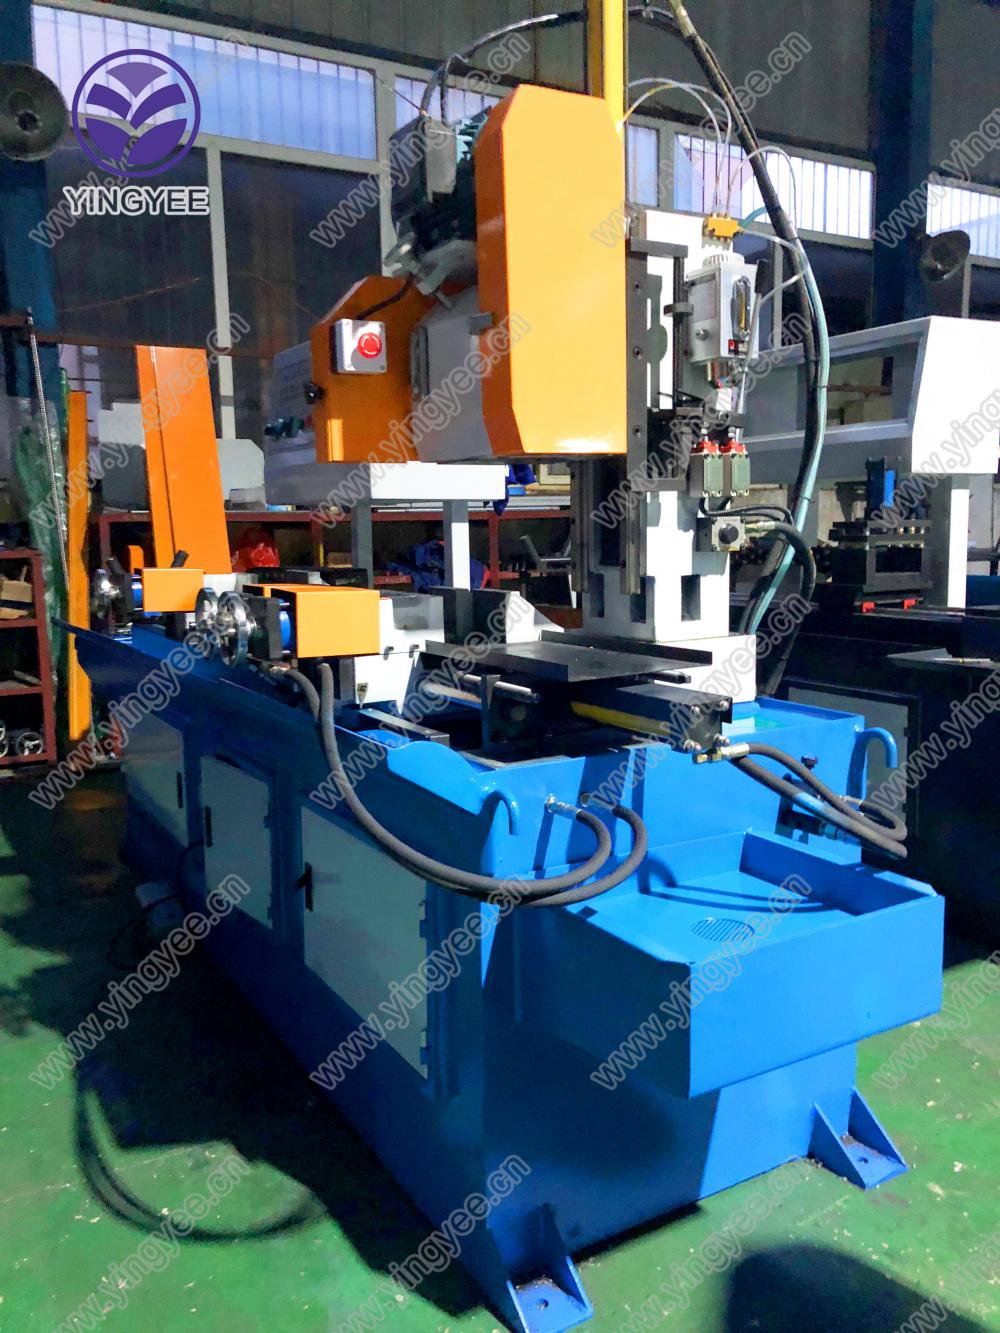 I-Auto Metal Pipe Cutting Machine From Yingyee004